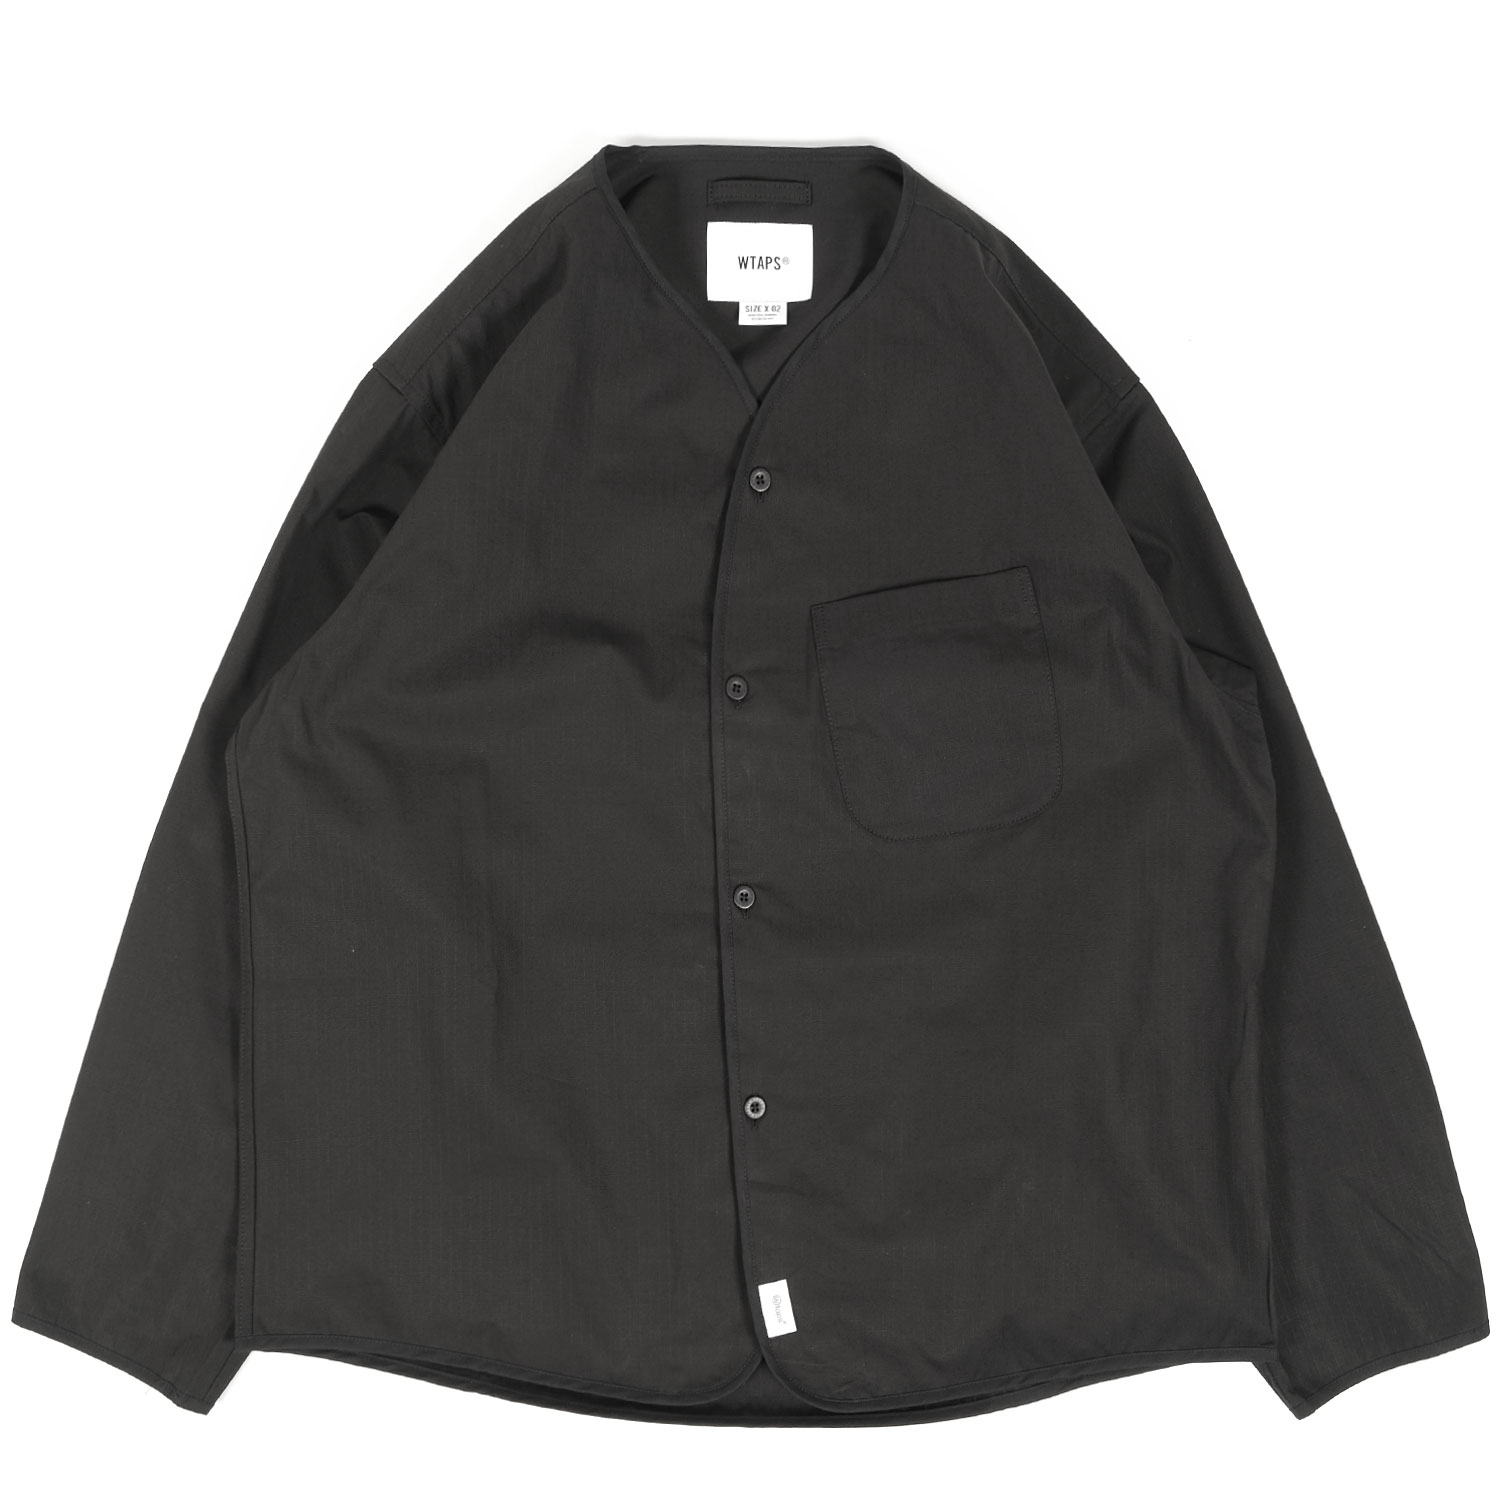 wtaps scout ダブルタップス 50%割引 - n3quimica.com.br